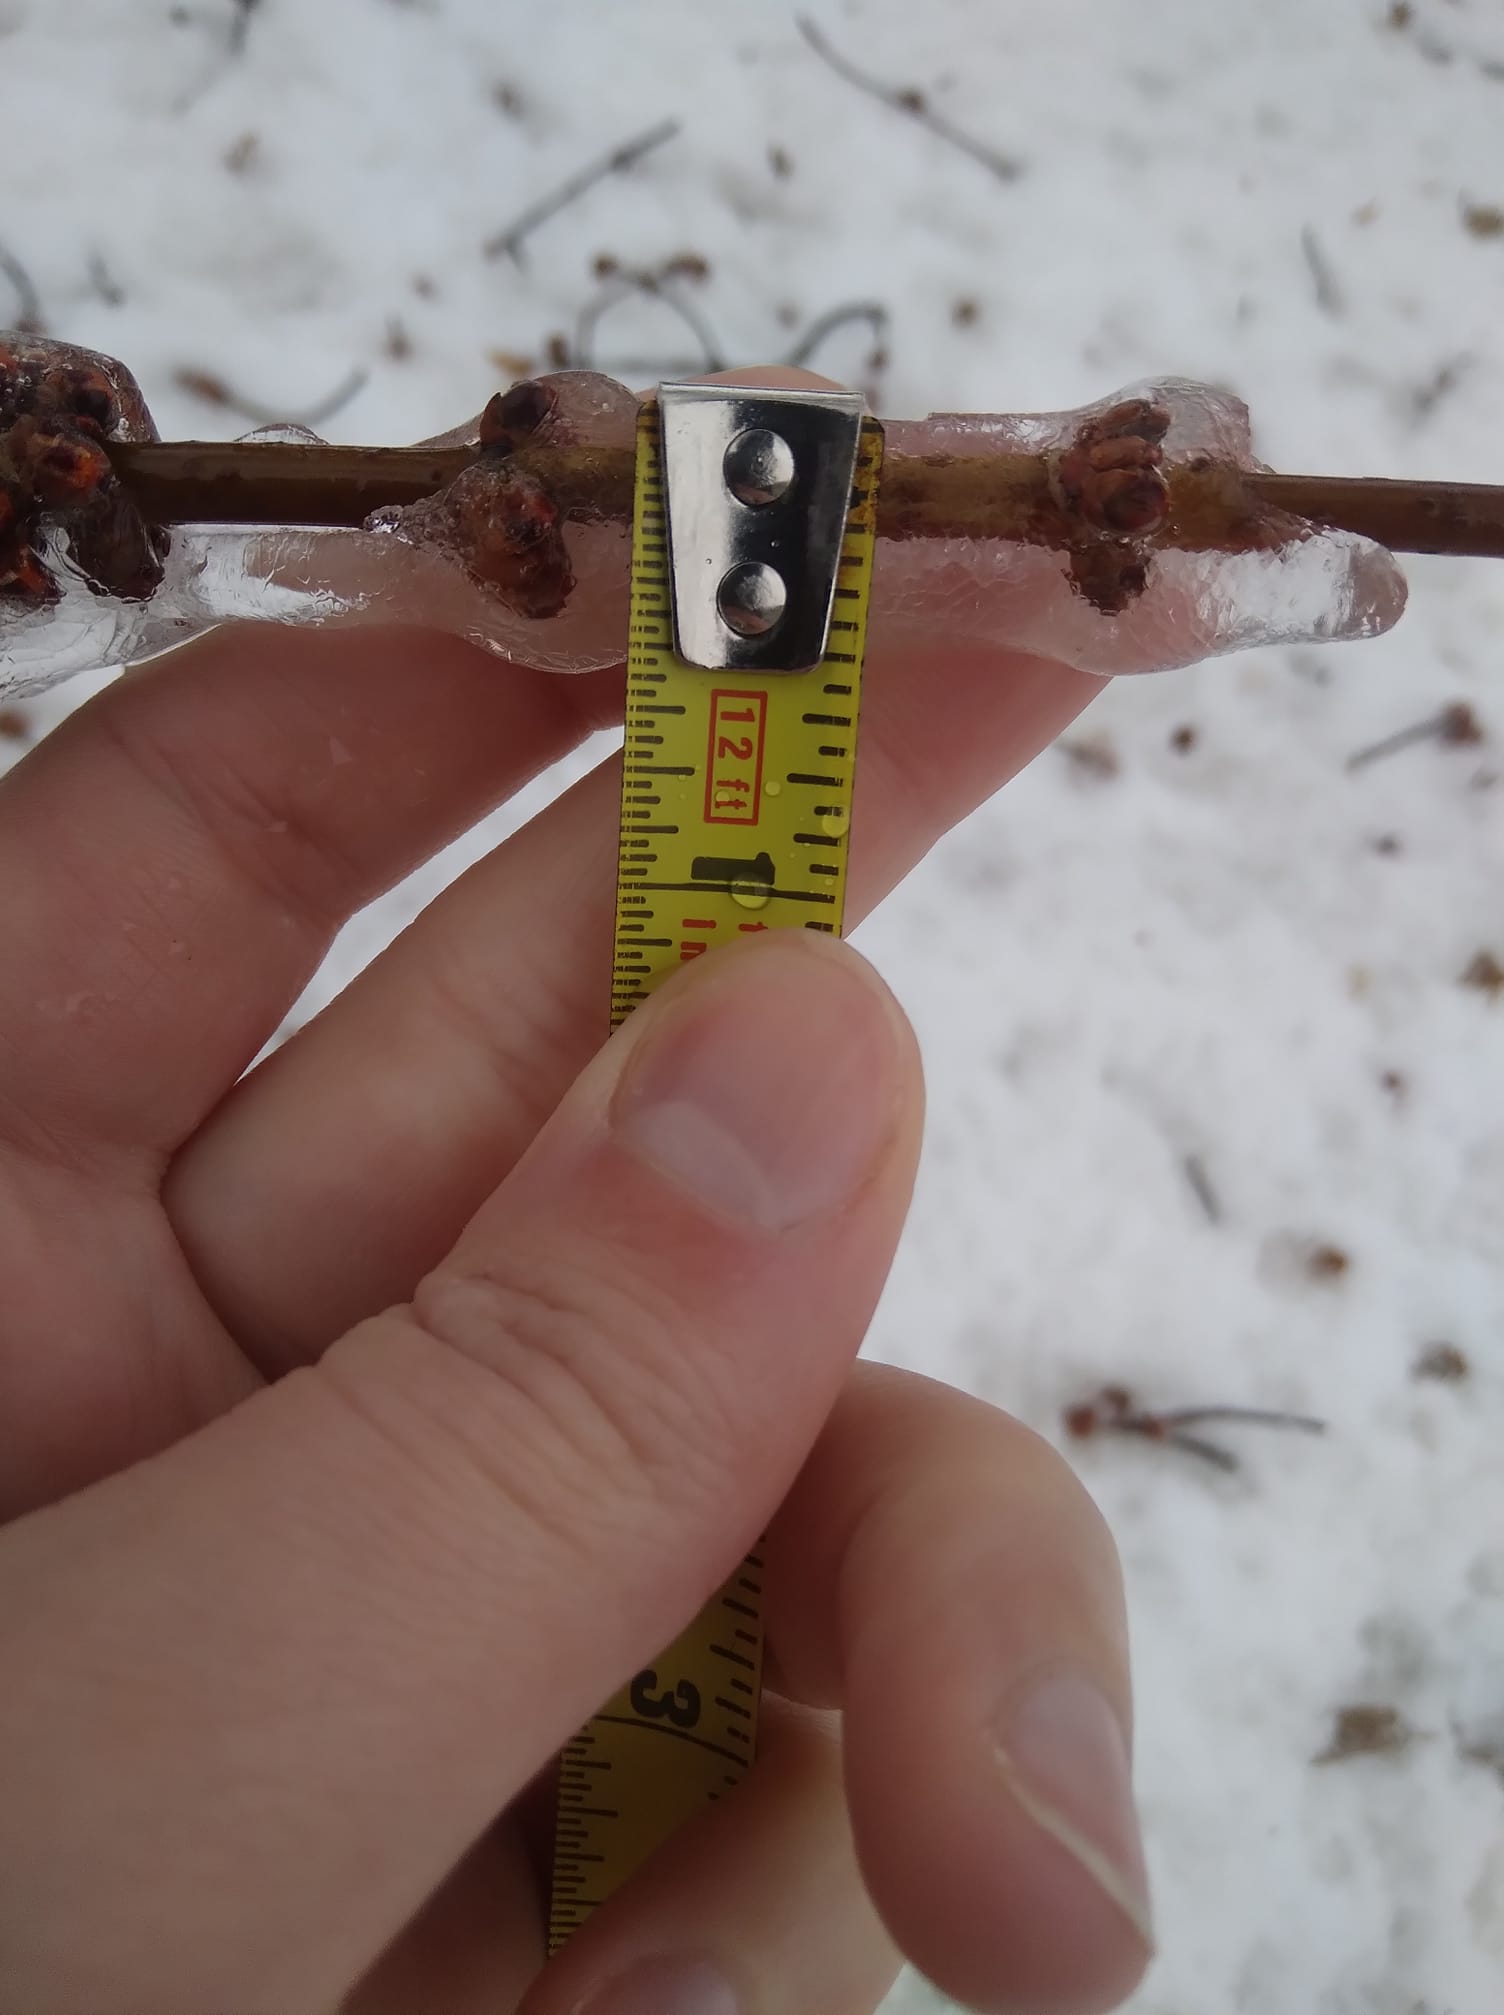 Metal tape measure illustrating approximately one half inch ice accretion around a small tree branch.